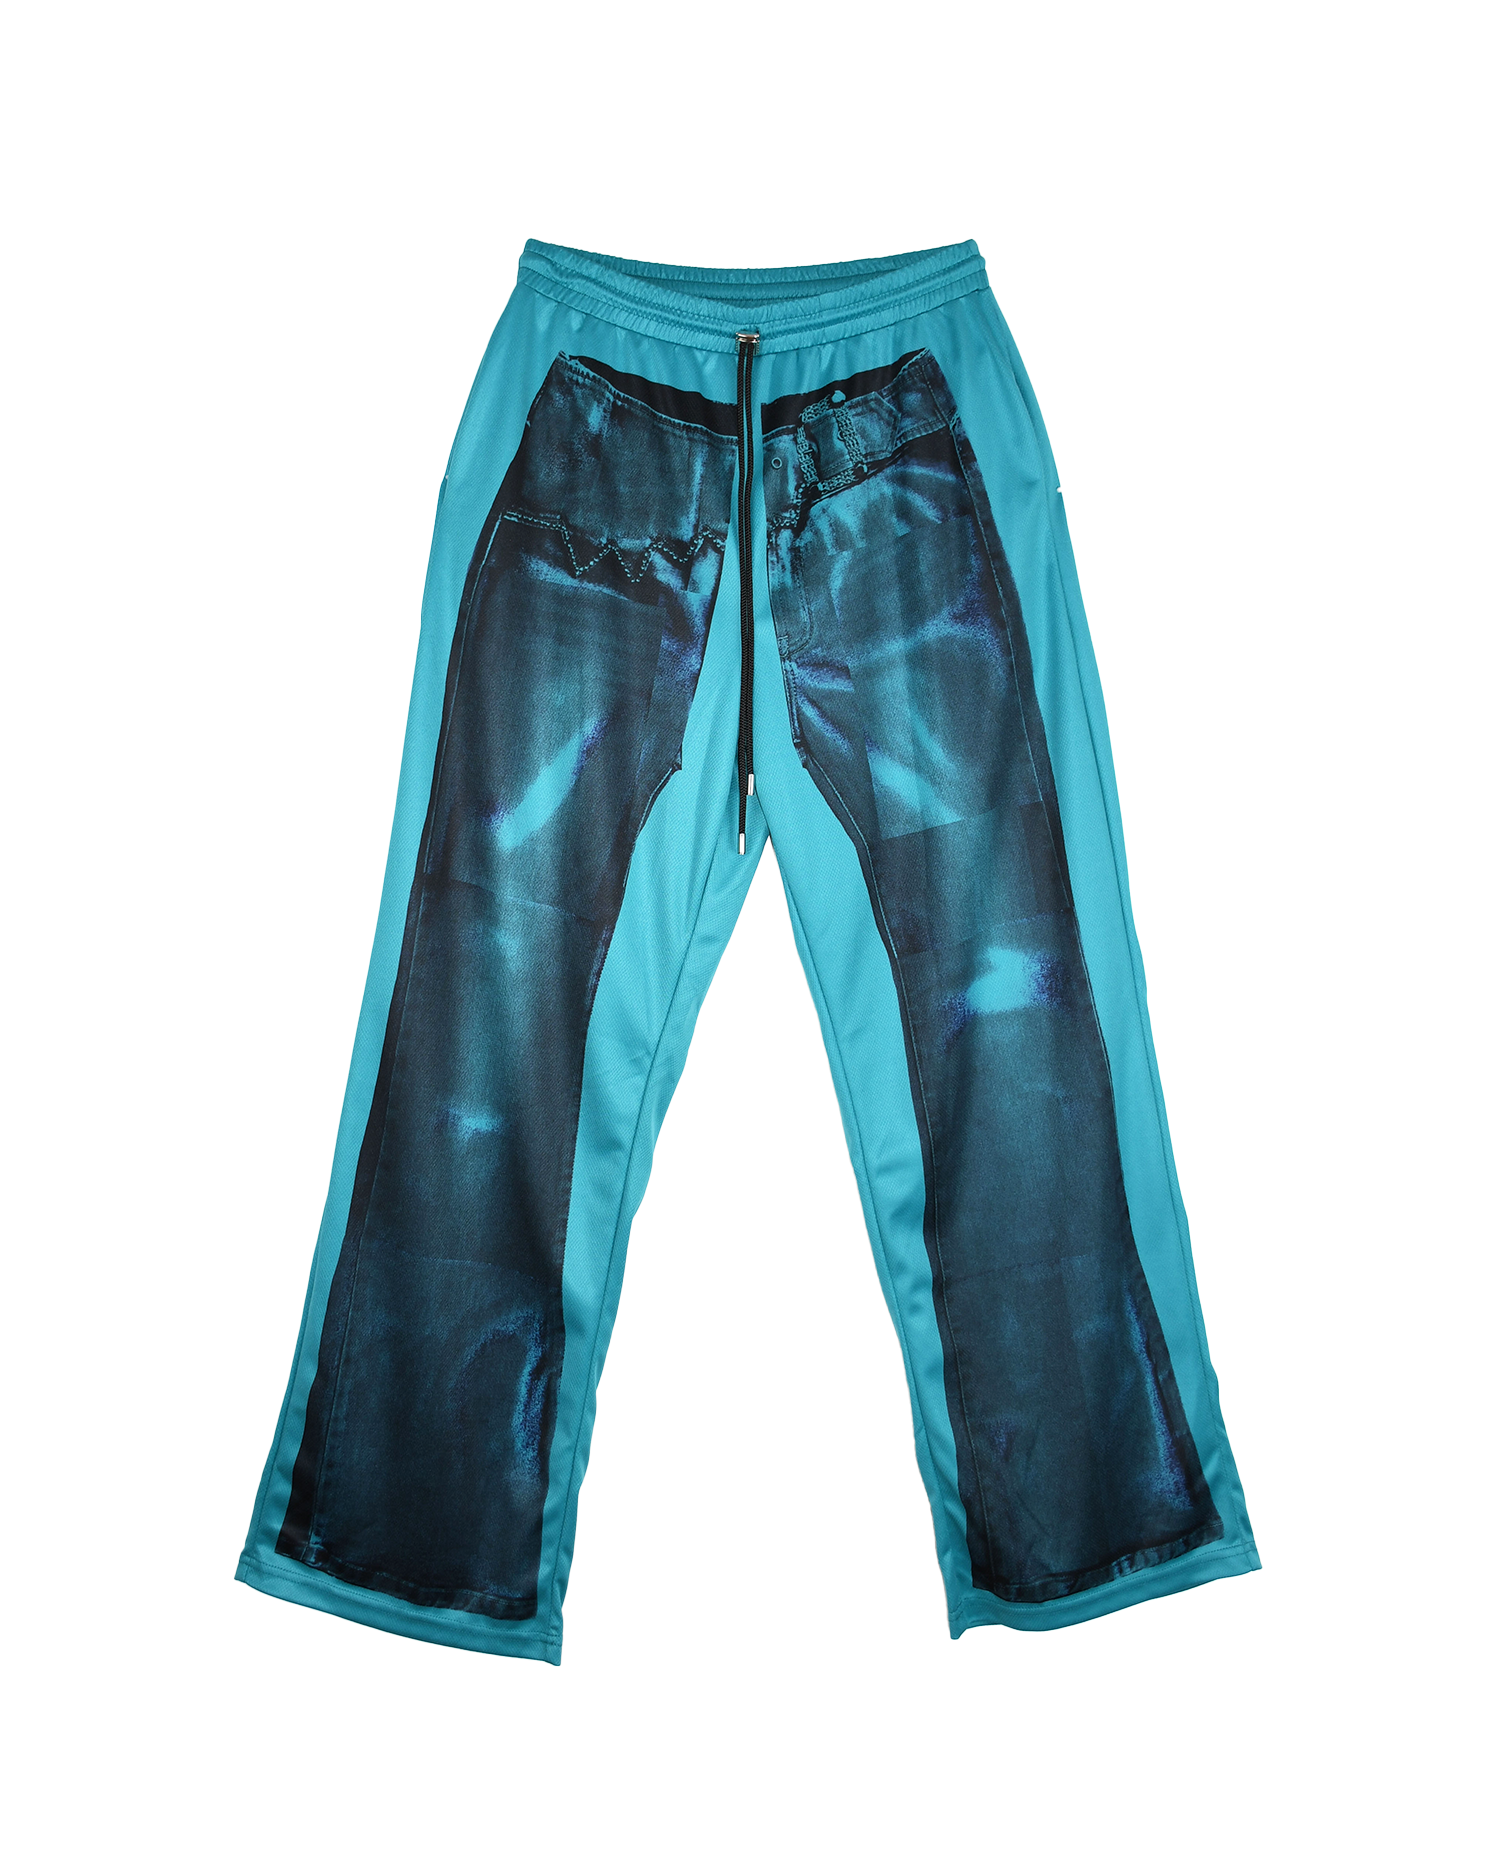 Briar Will - The Denim Tracksuit Pants – Teal